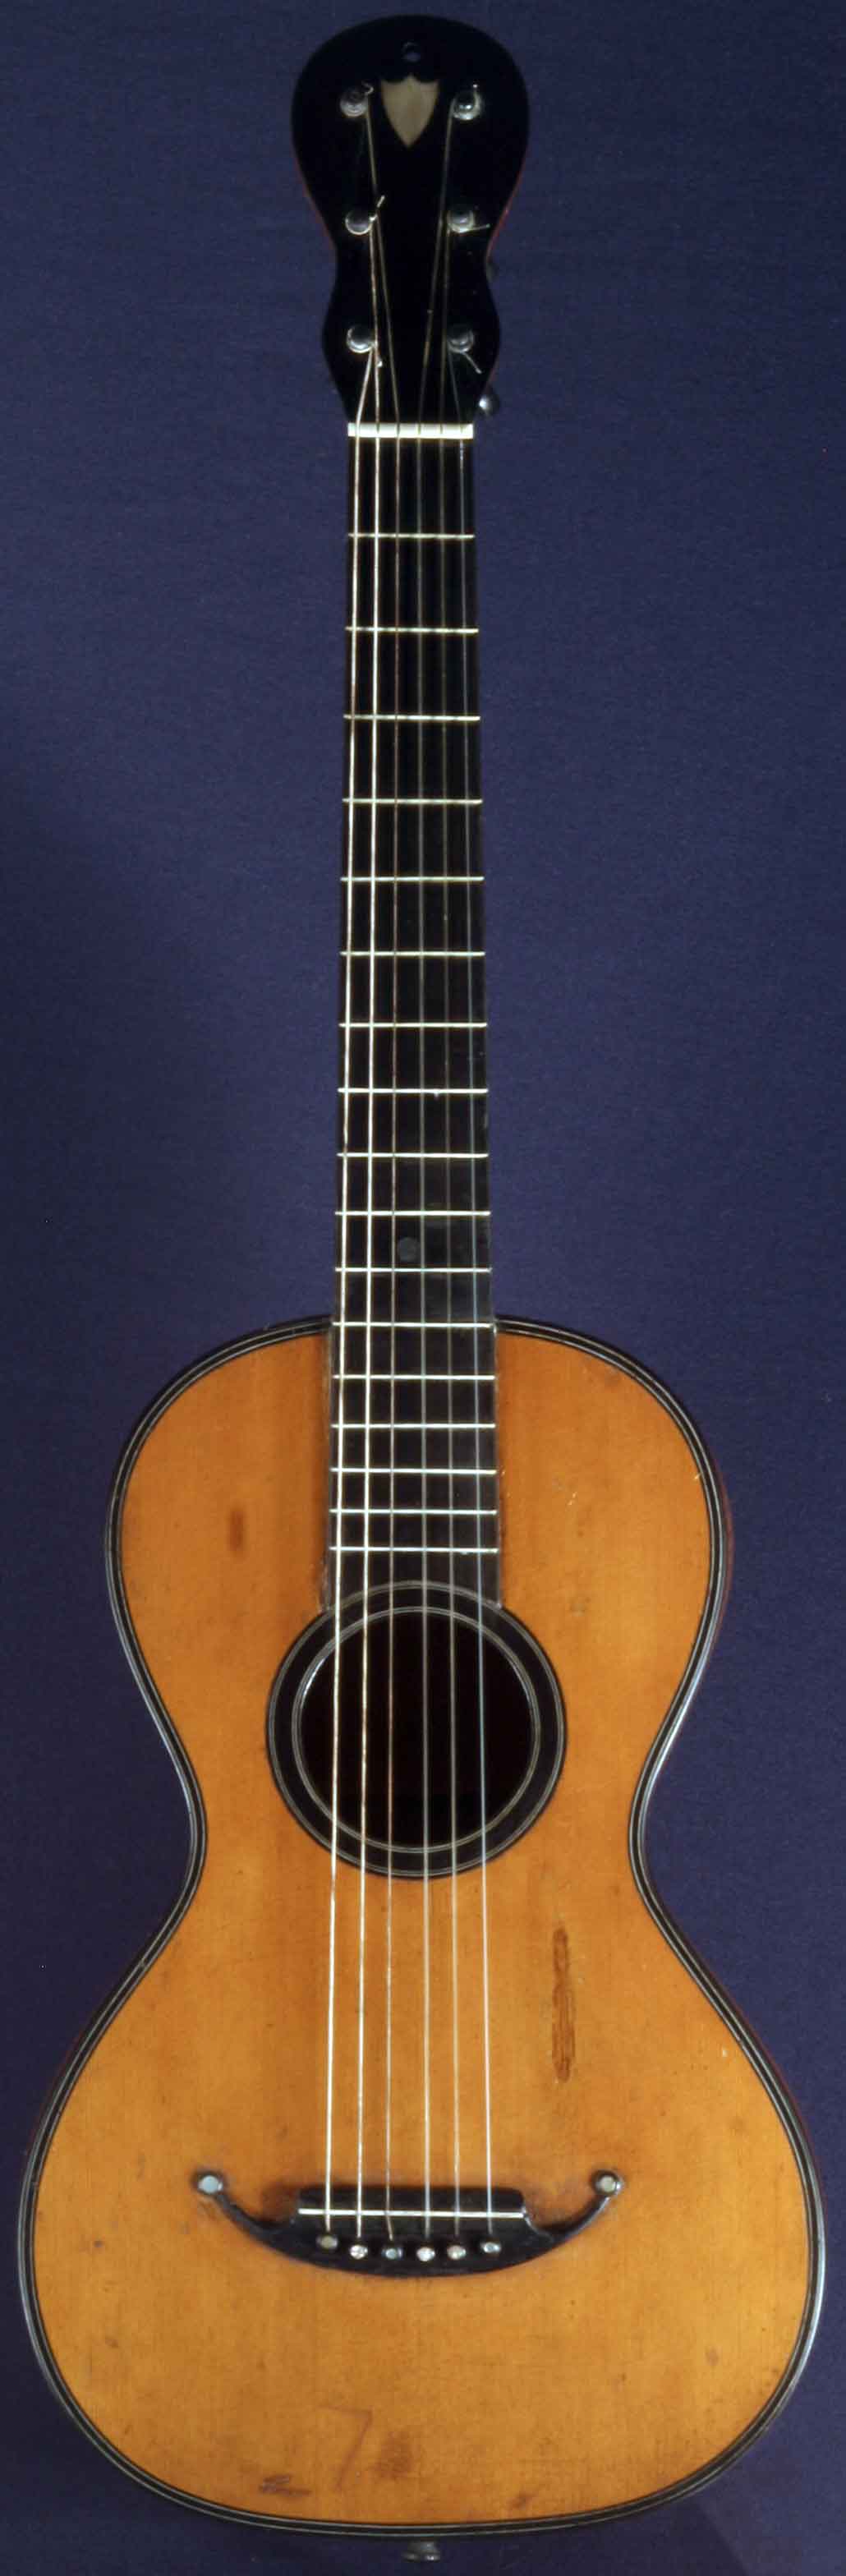 Early Musical Instruments part of the Bruderlin Collection, antique Romantic Guitar by Drouot / Koel around 1830